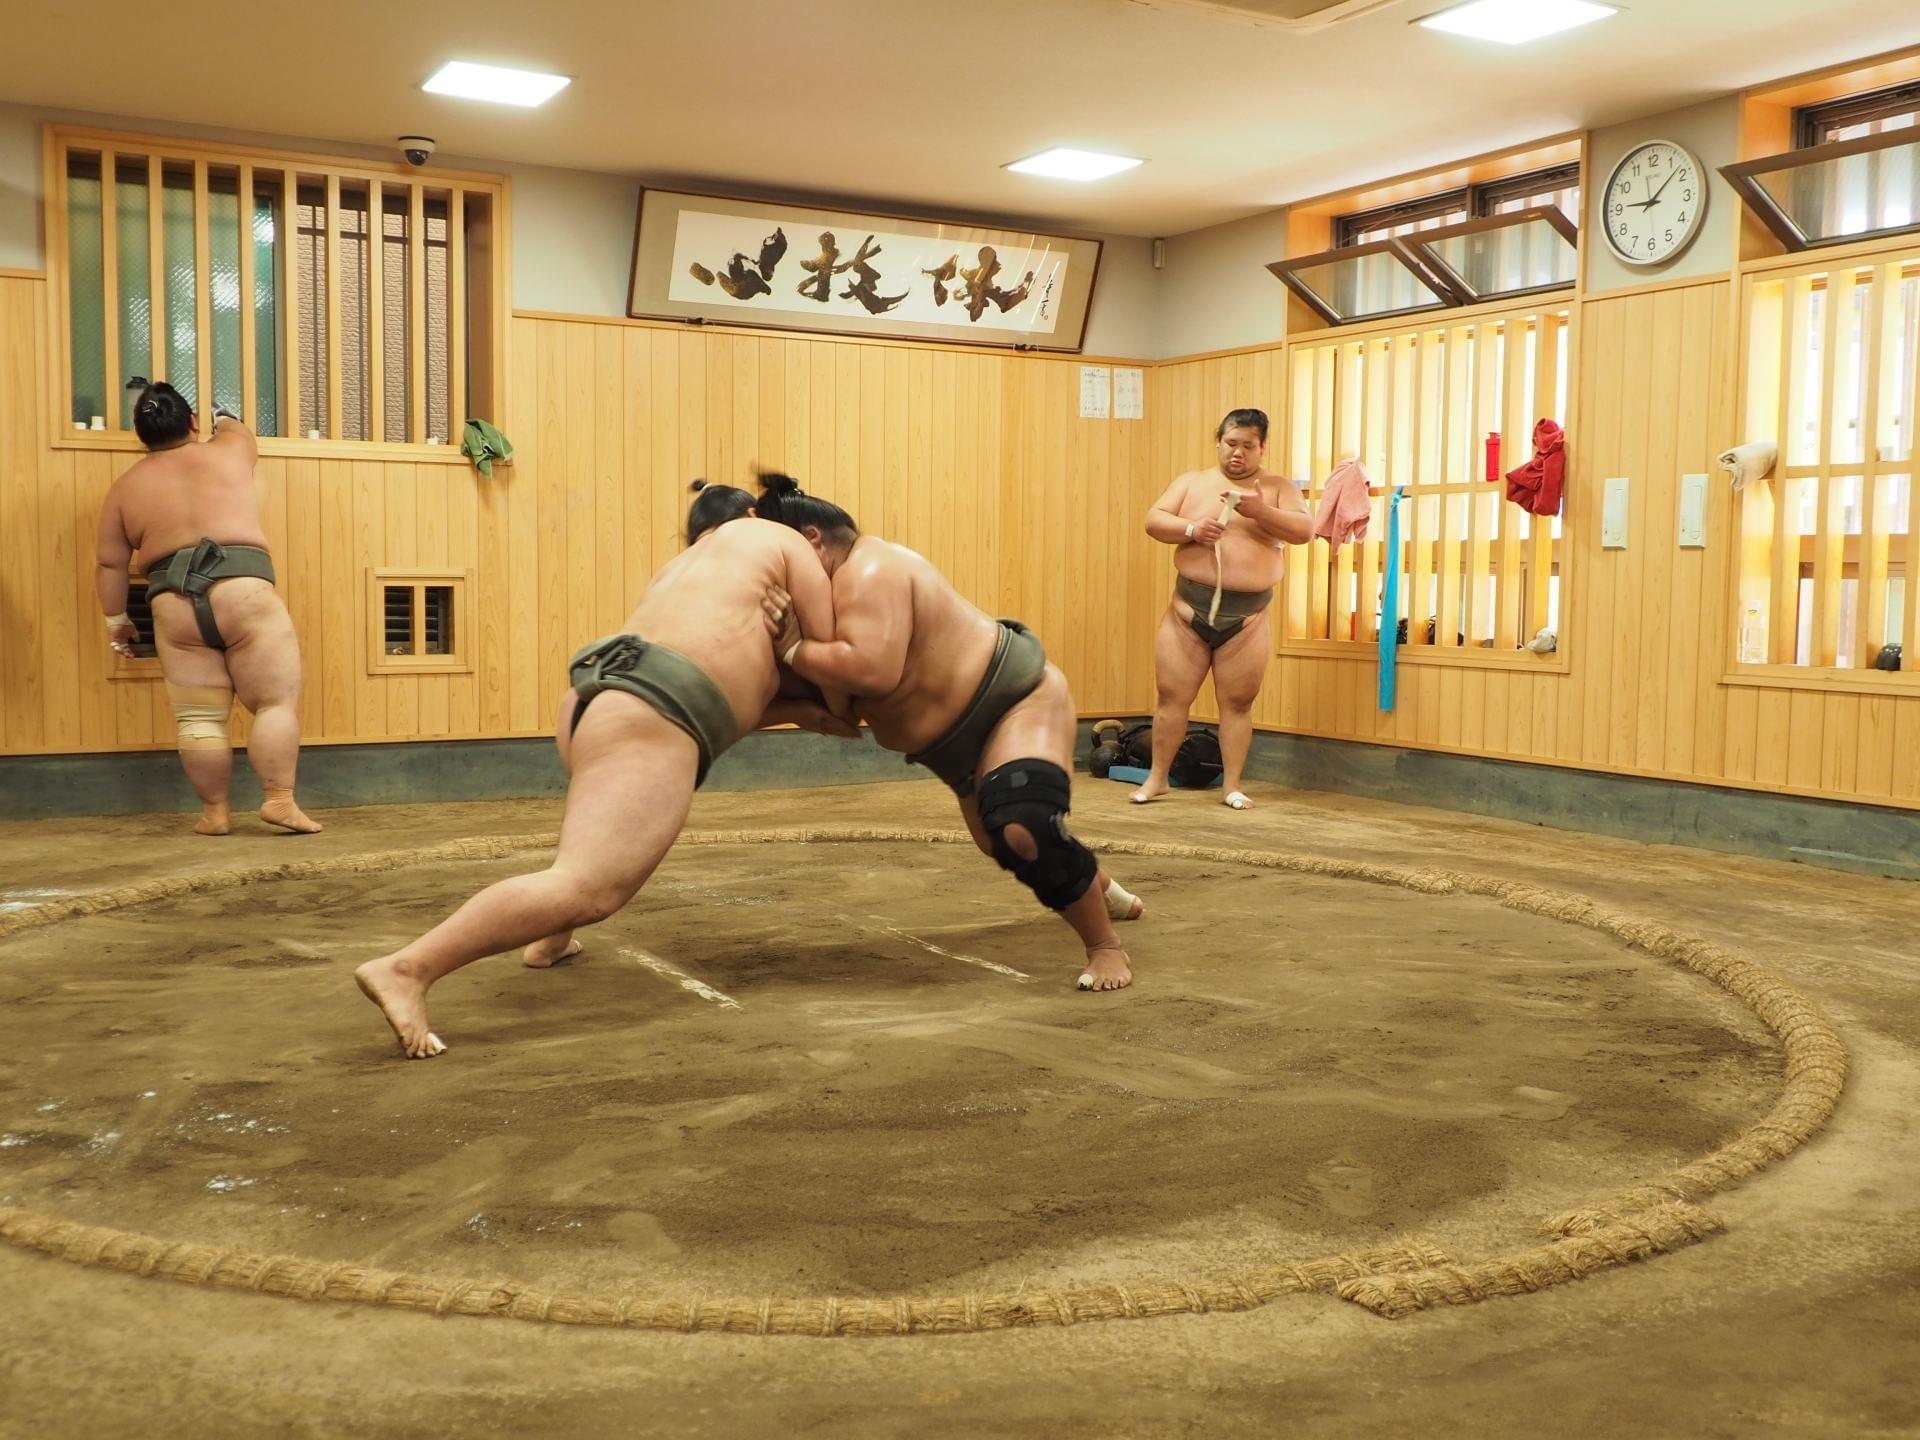 Visit the sumo stables